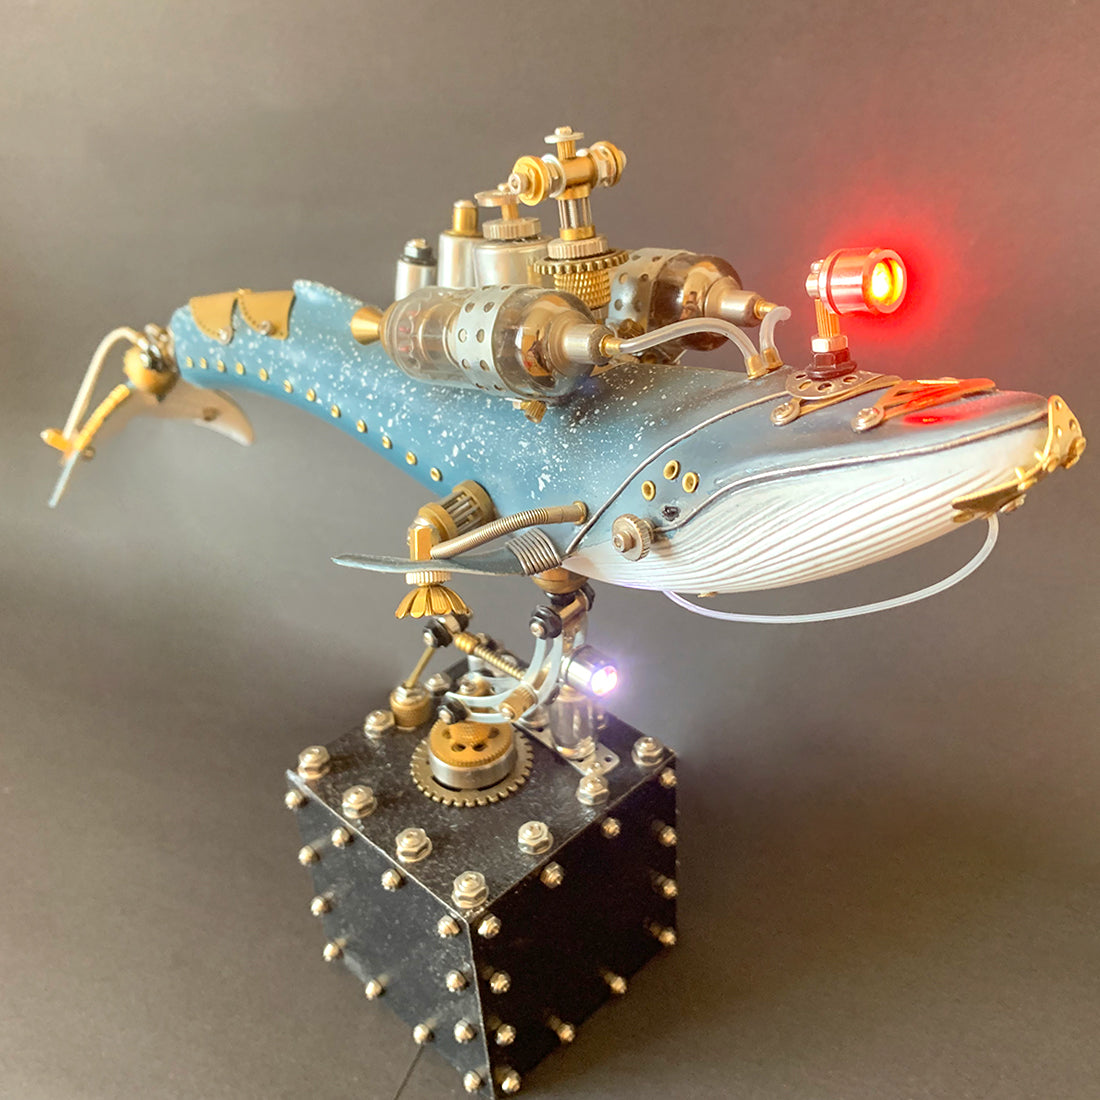 Creative 3D Blue Whale Animal Metal Steampunk Model with Base Handmade Assembled Crafts